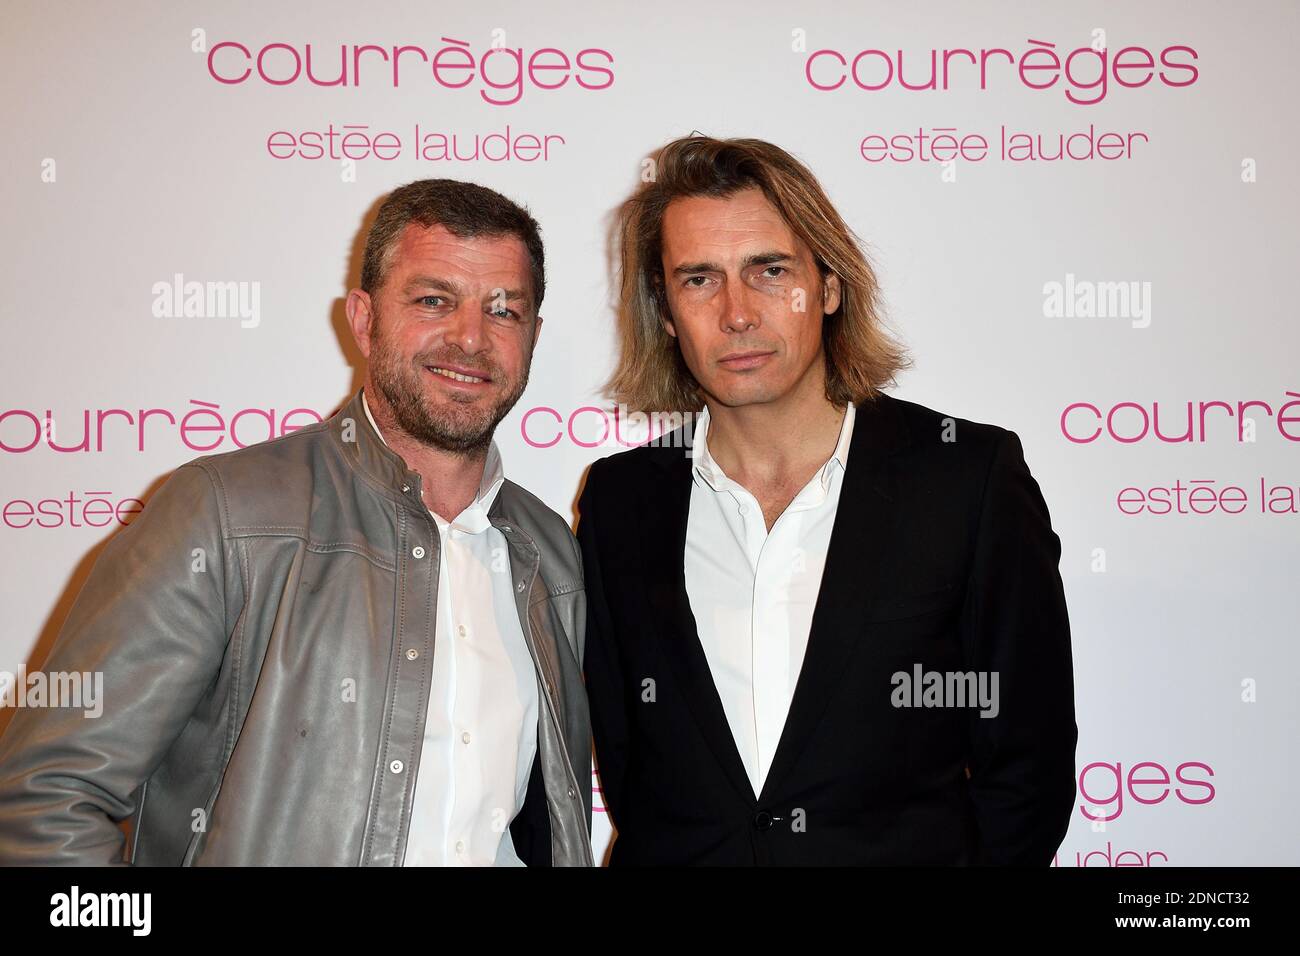 Frederic Torloting and Jacques Bungert attending Courreges X Estee Lauder  Dinner Party during Fall/Winter 2015-2016 Ready-To-Wear collection show in  Paris, France, on March 7, 2015. Photo by Nicolas Briquet/ABACAPRESS.COM  Stock Photo -